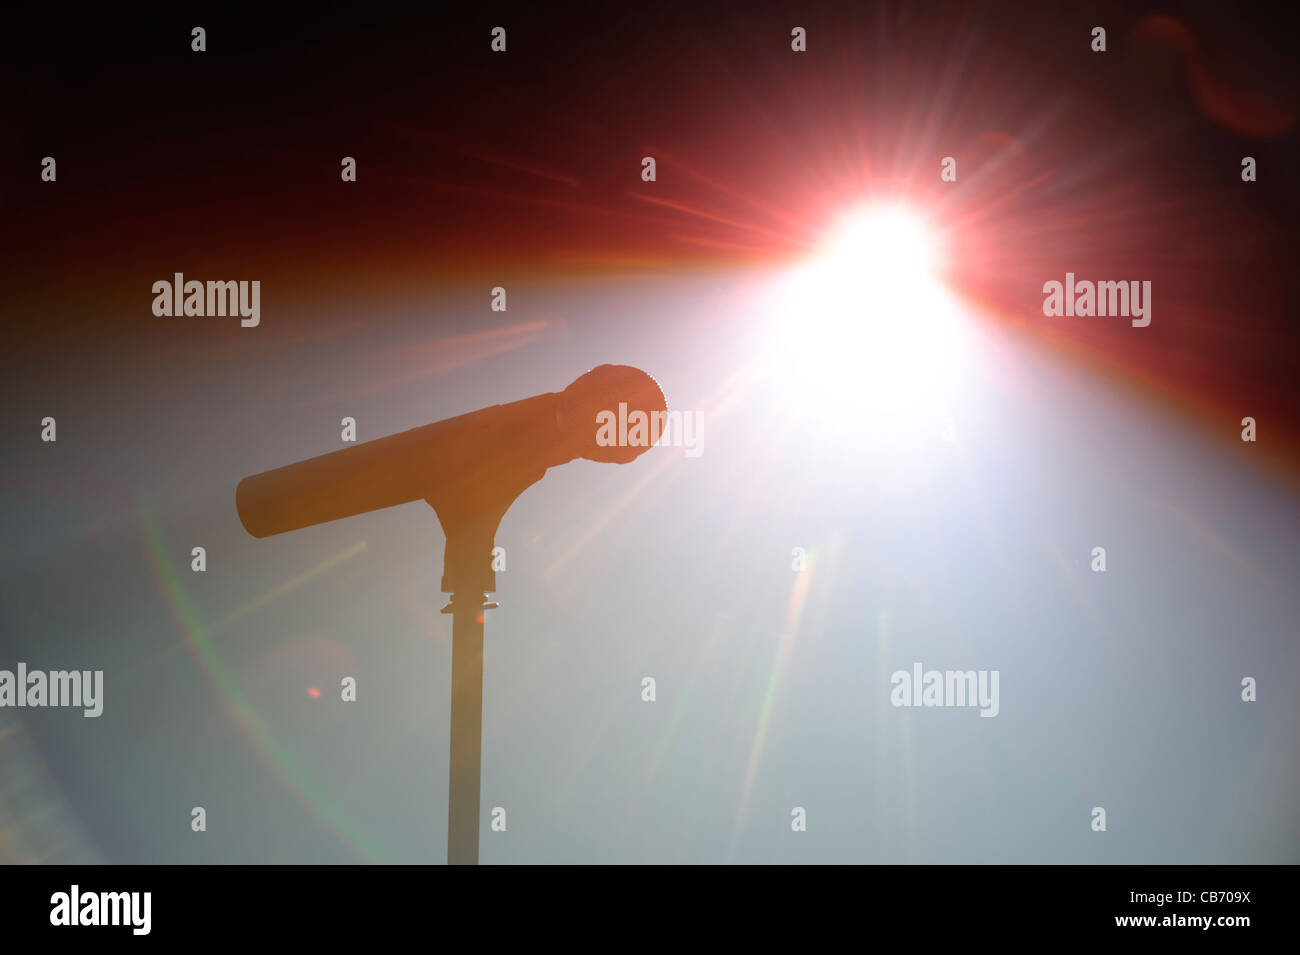 Spot lit microphone and stand on an empty stage Stock Photo